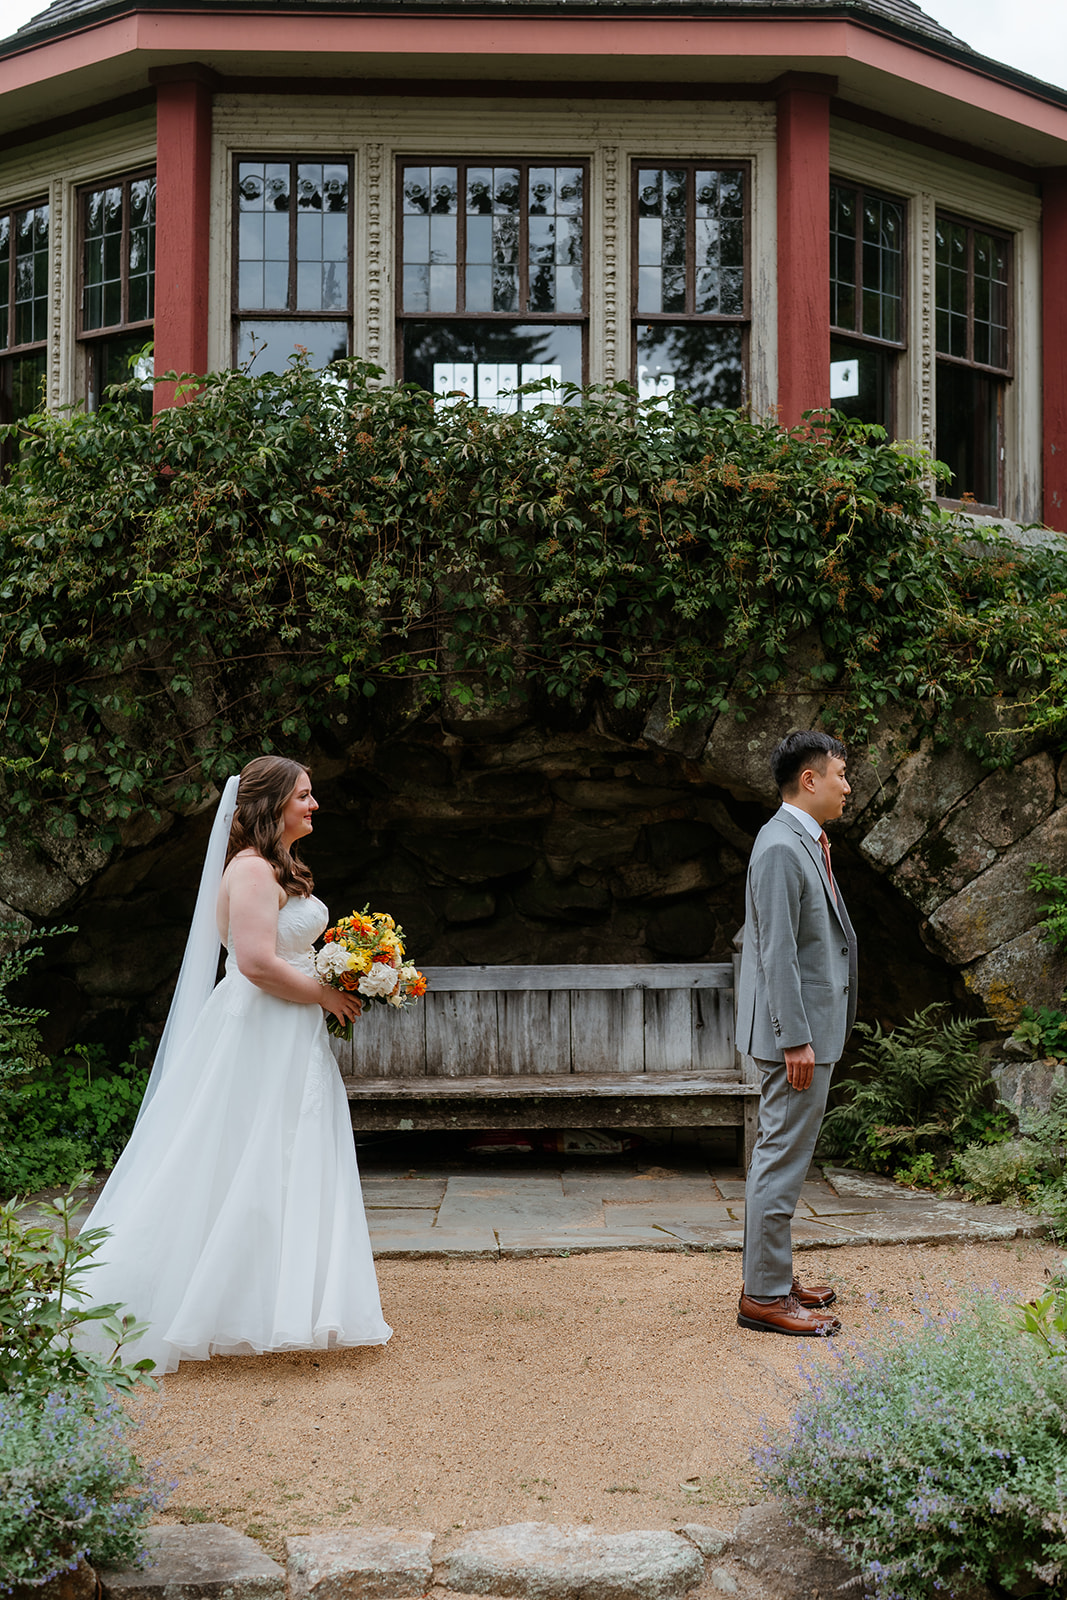 A bride and groom smiling at each other in a garden setting with a stone wall and wooden bench in the background at the estate at moraine farm